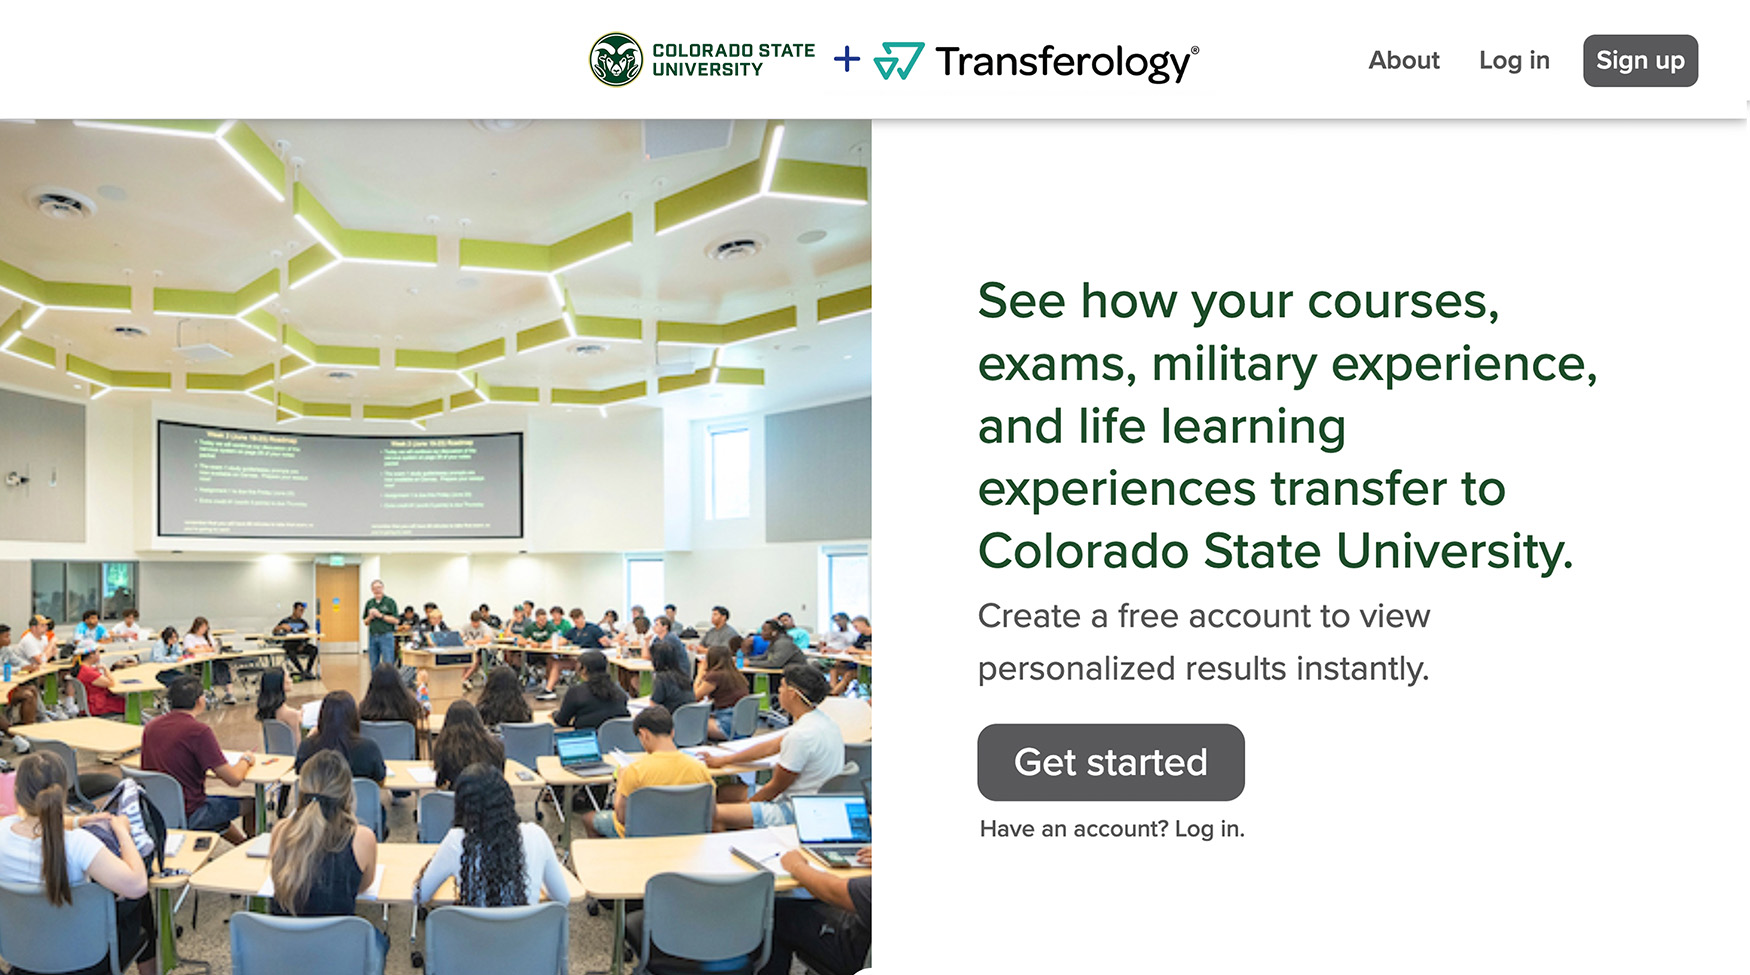 Example of a portion of an institution landing page. This landing page is a test example created by CollegeSource to demonstrate functionality and was not created by or endorsed by Colorado State University. 